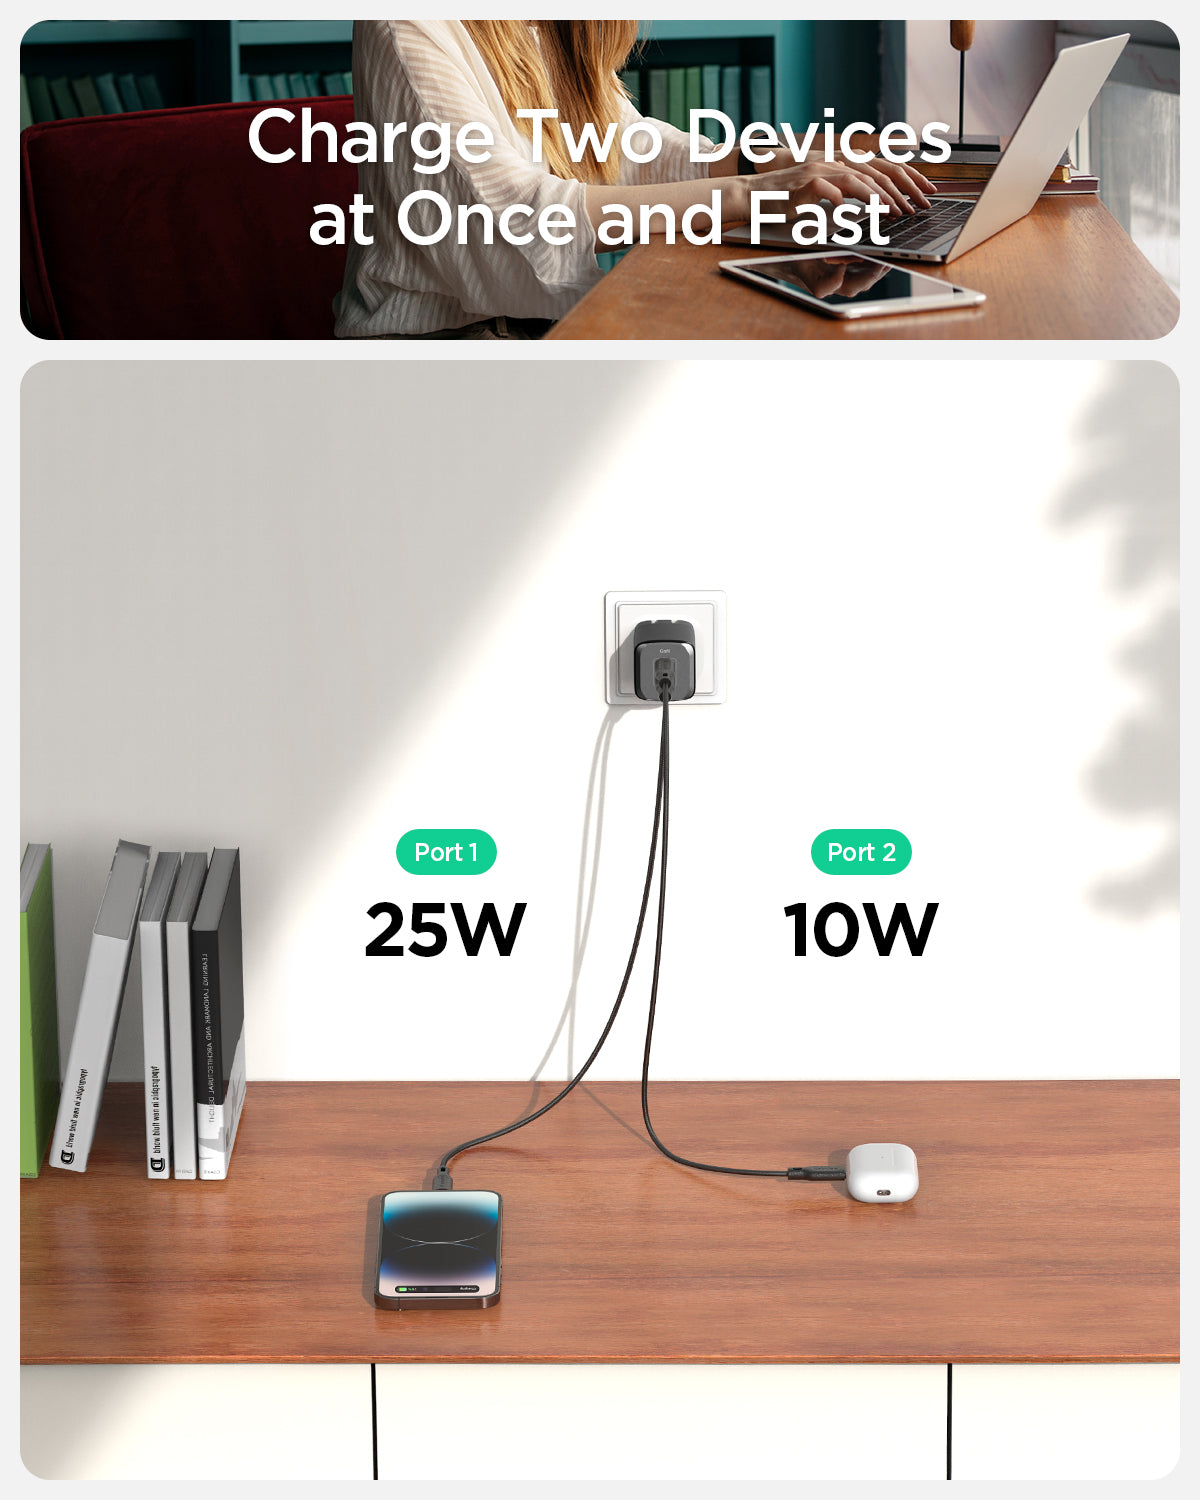 ACH05142 - ArcStation™ Pro GaN 352 Dual USB-C Wall Charger PE2202 showing charge two devices at once and fast. Port 1 up to 25W and port 2 up to 10W.